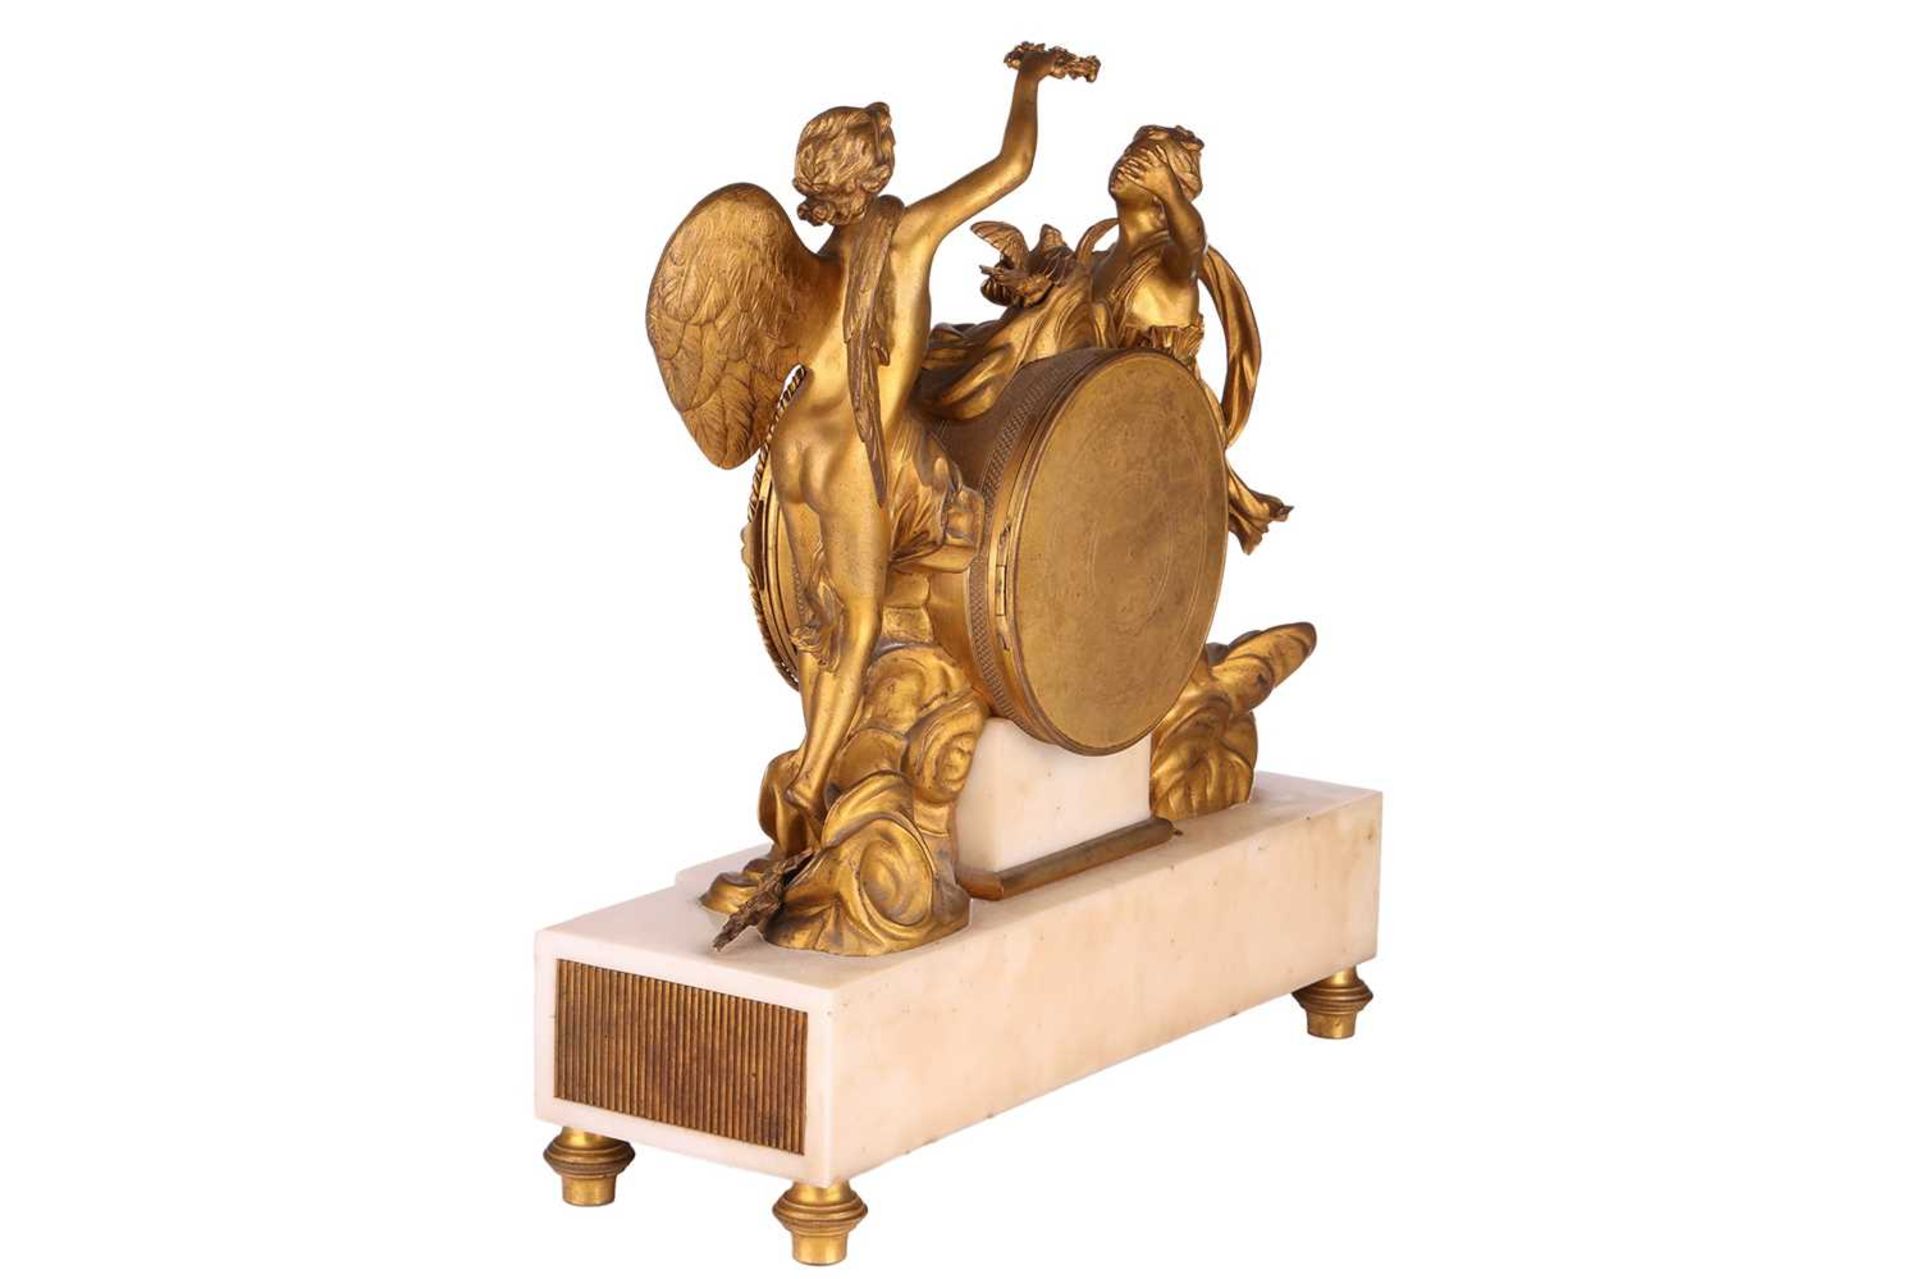 A French Le Roy et Fils (?) ormolu and white marble mantel clock with a figural mount allegorical of - Image 4 of 6